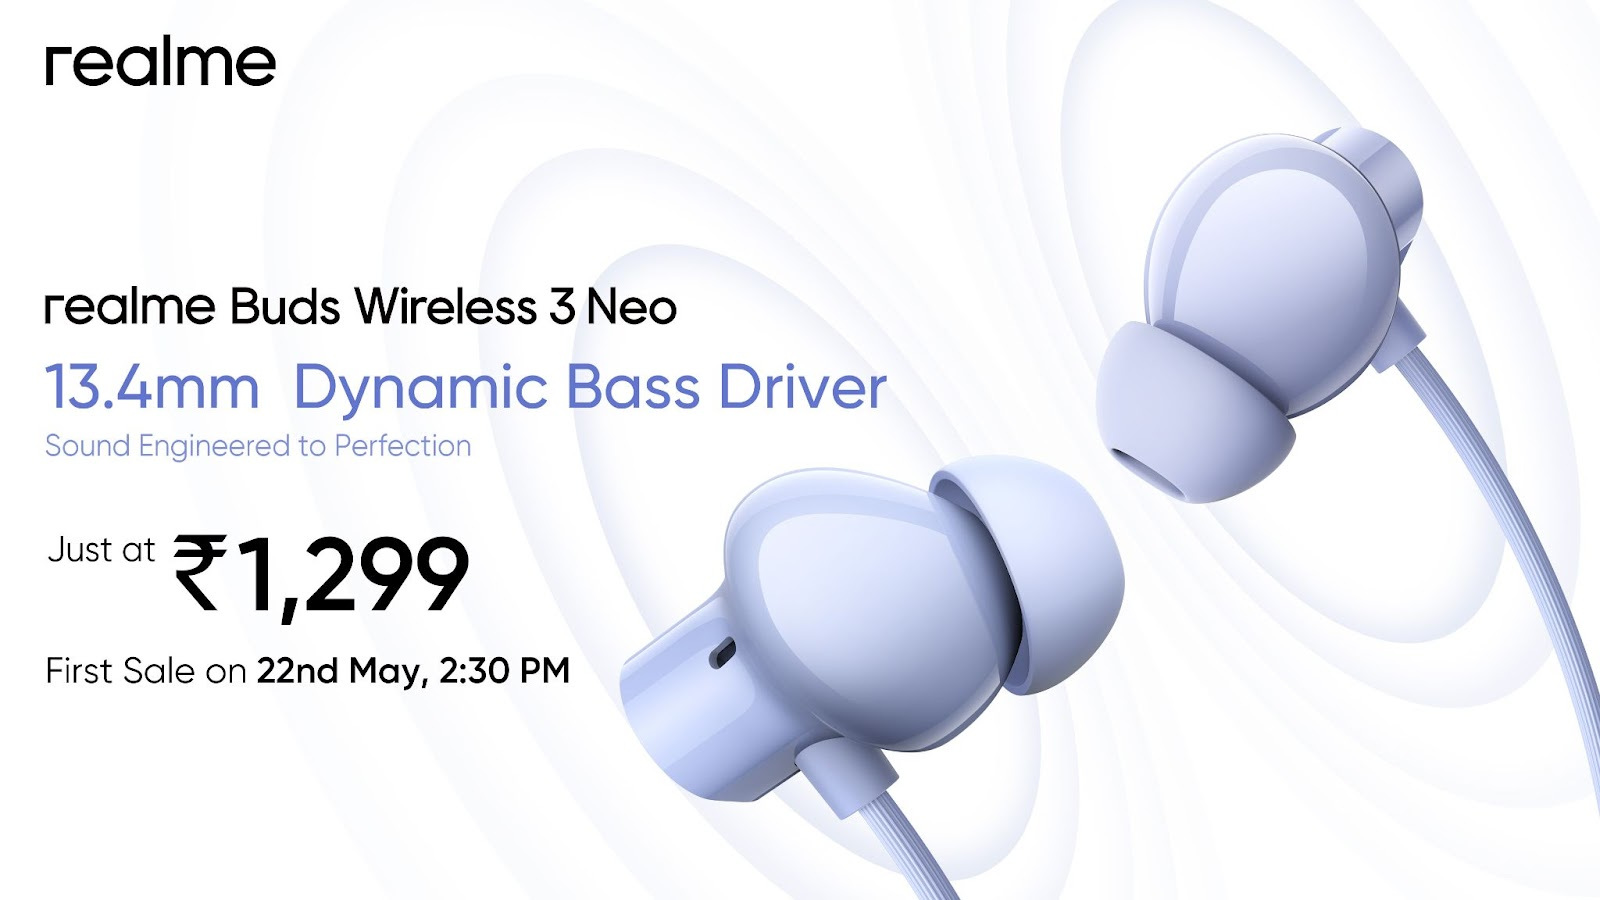 realme Buds Wireless 3 Neo launching in India on May 22 for Rs. 1299